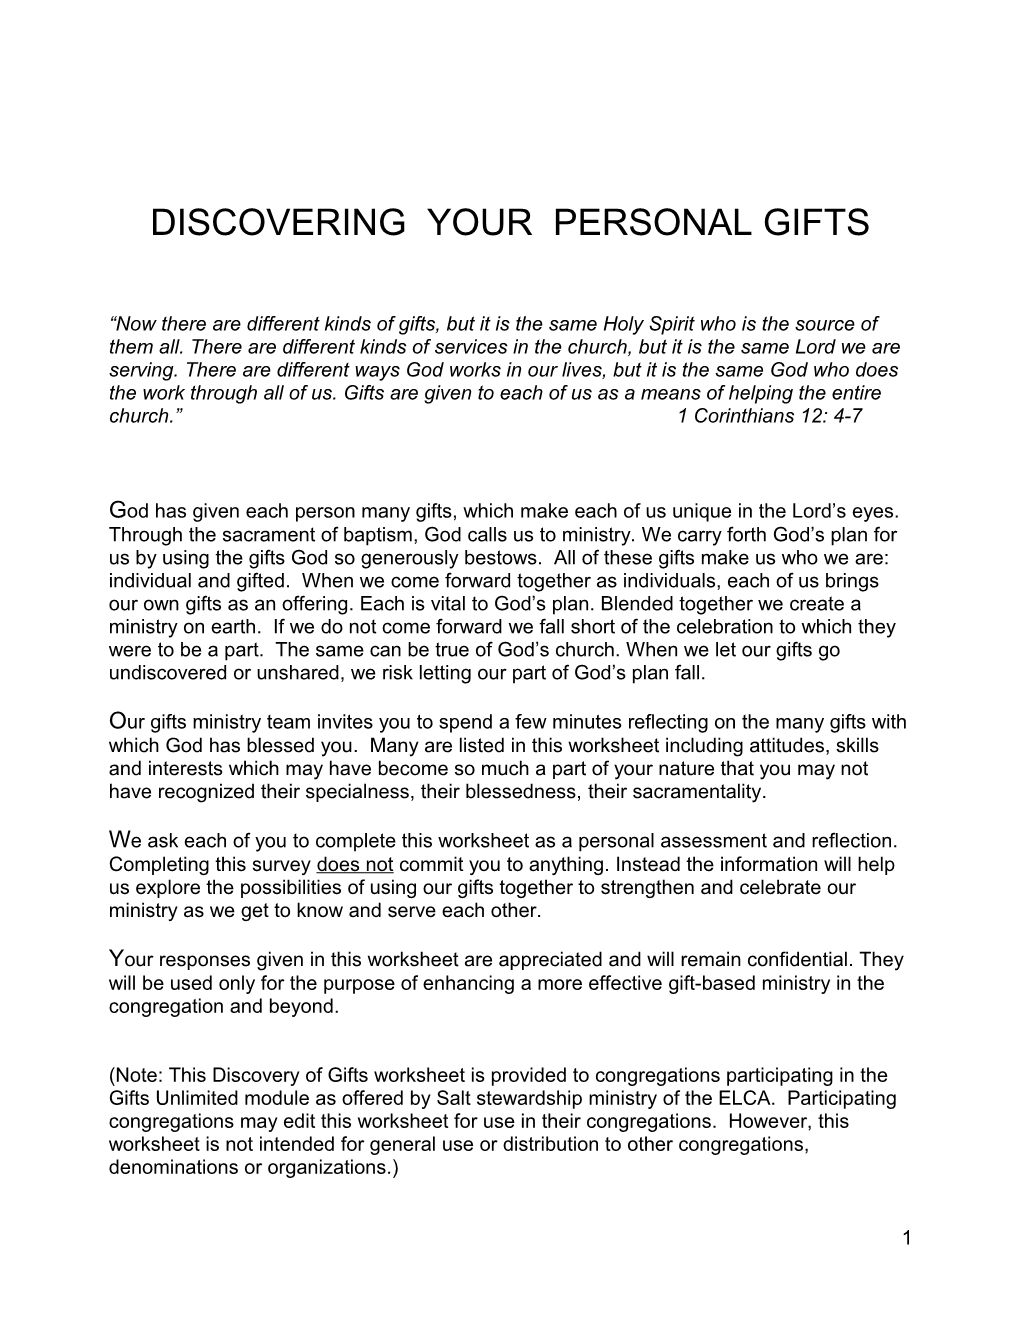 Discover Your Personal Gifts